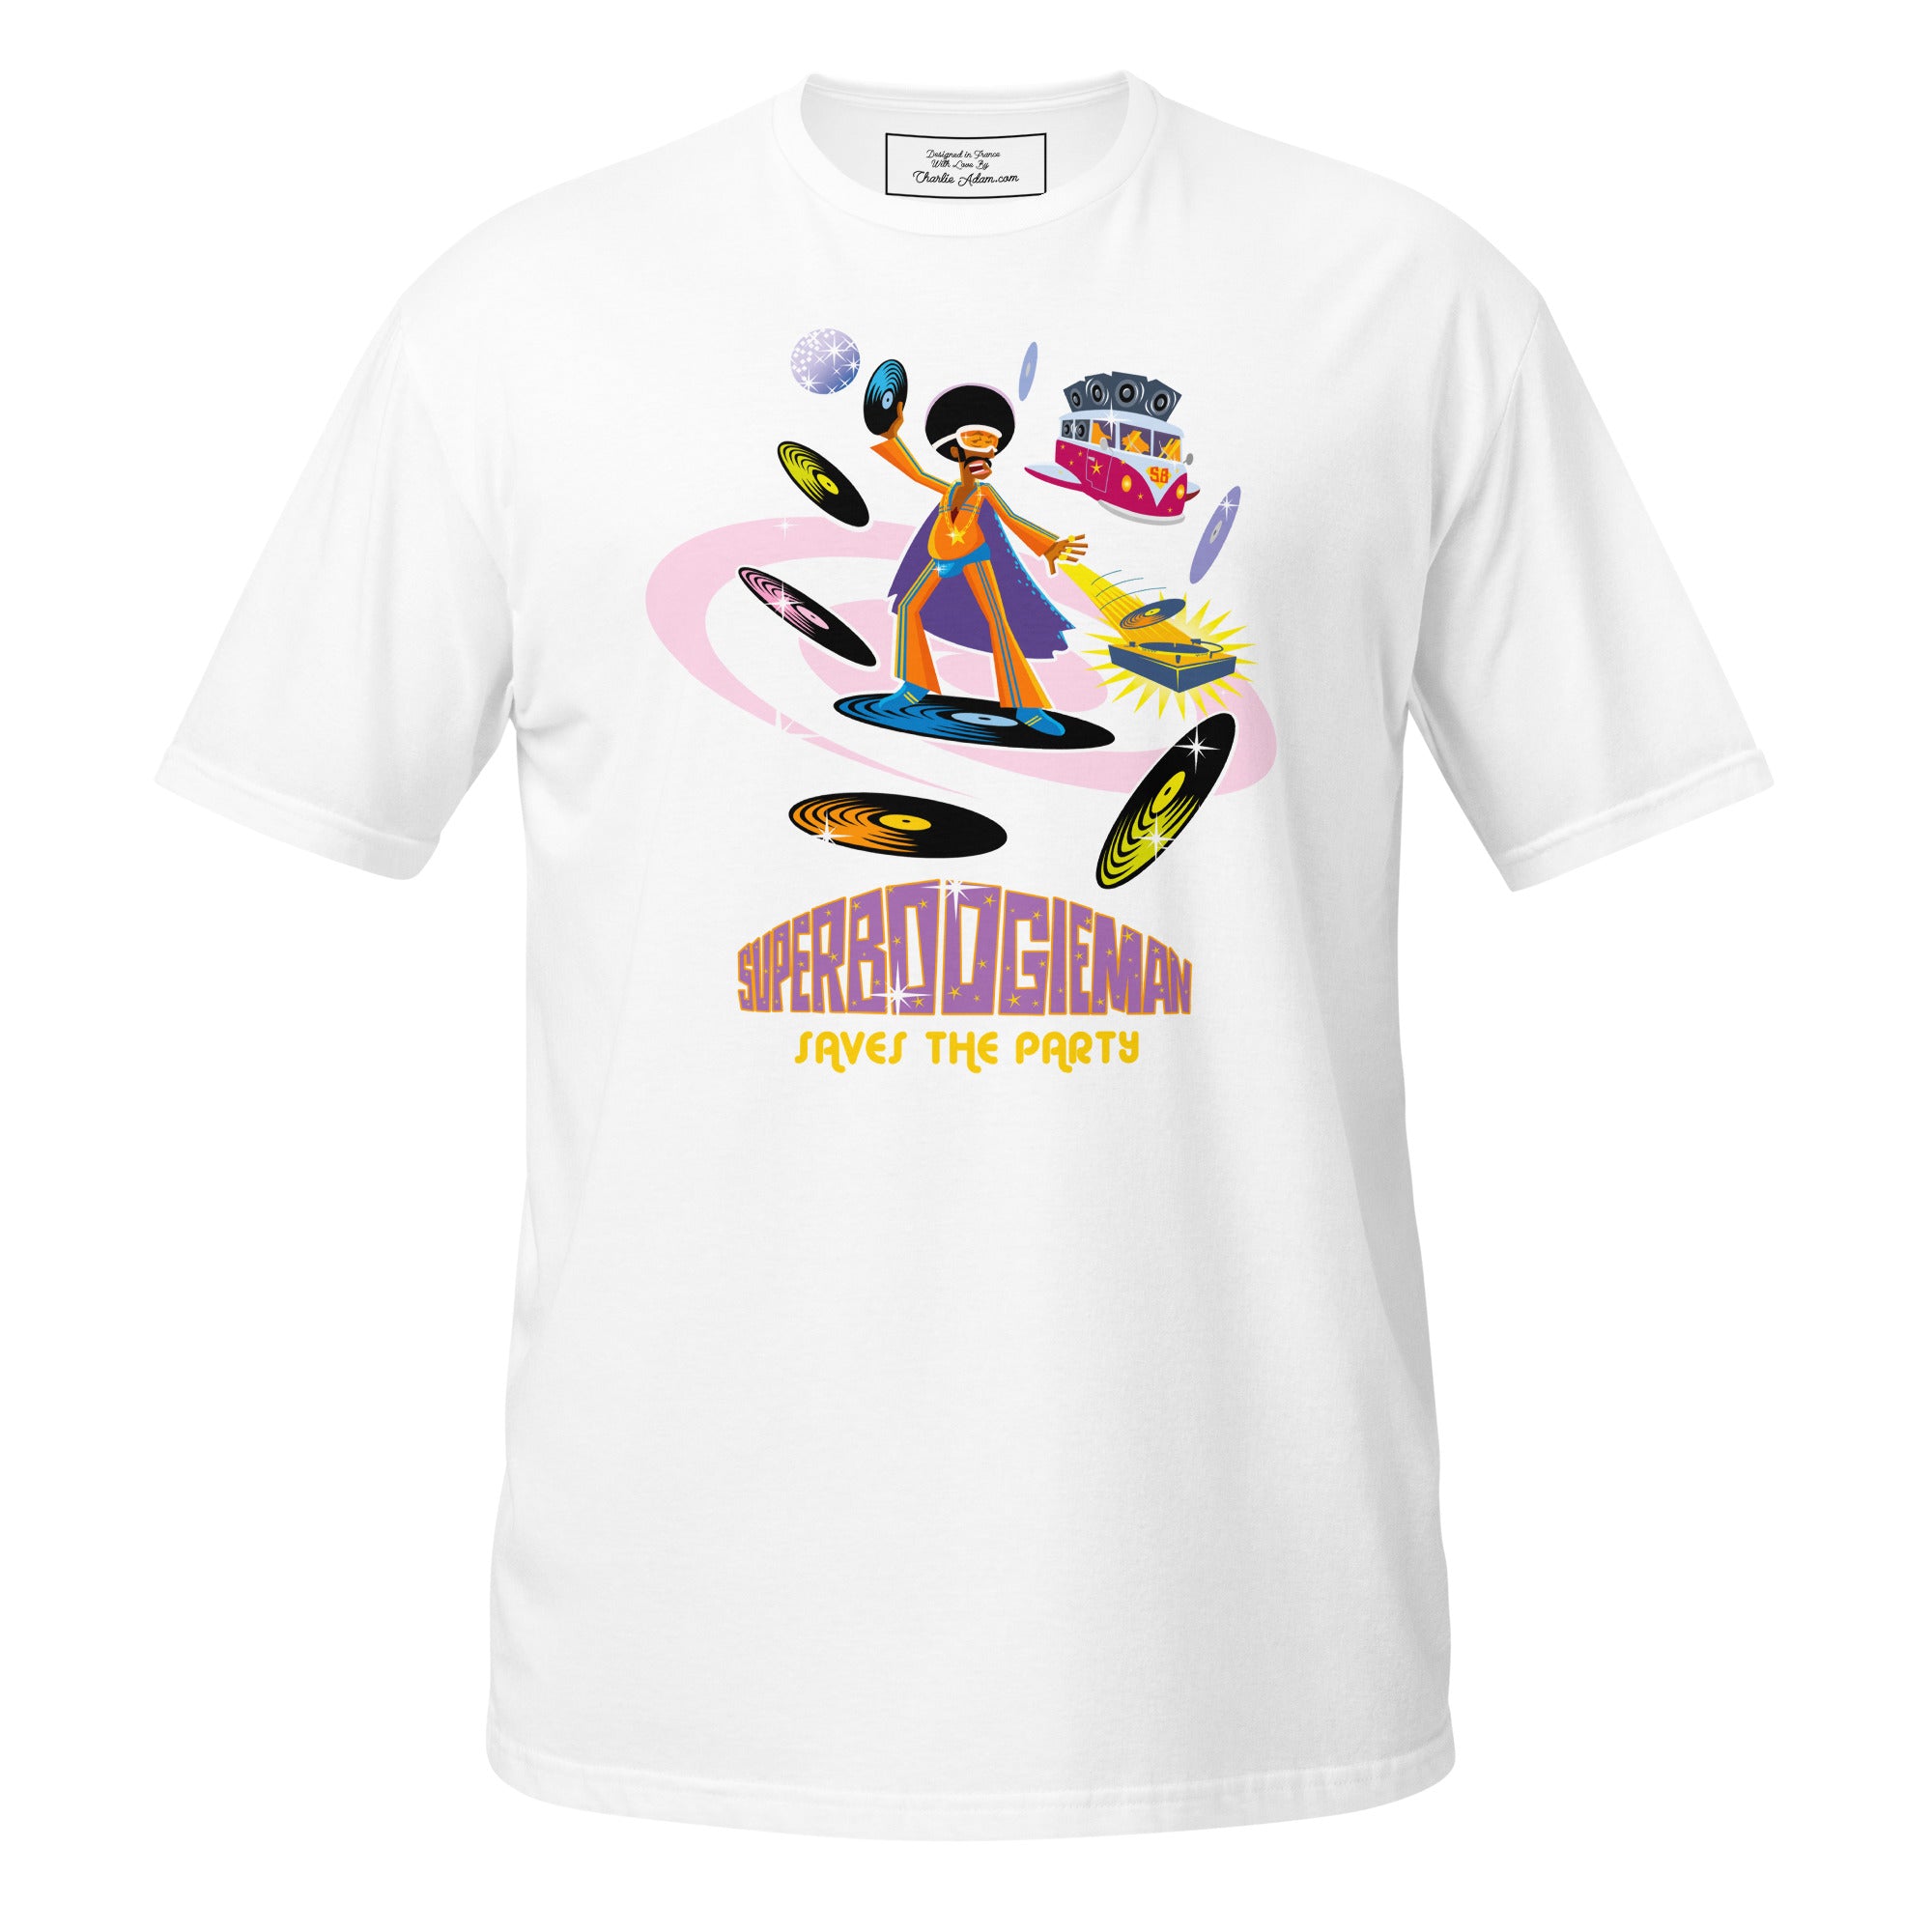 T-shirt softstyle en coton Superboogieman saves the party